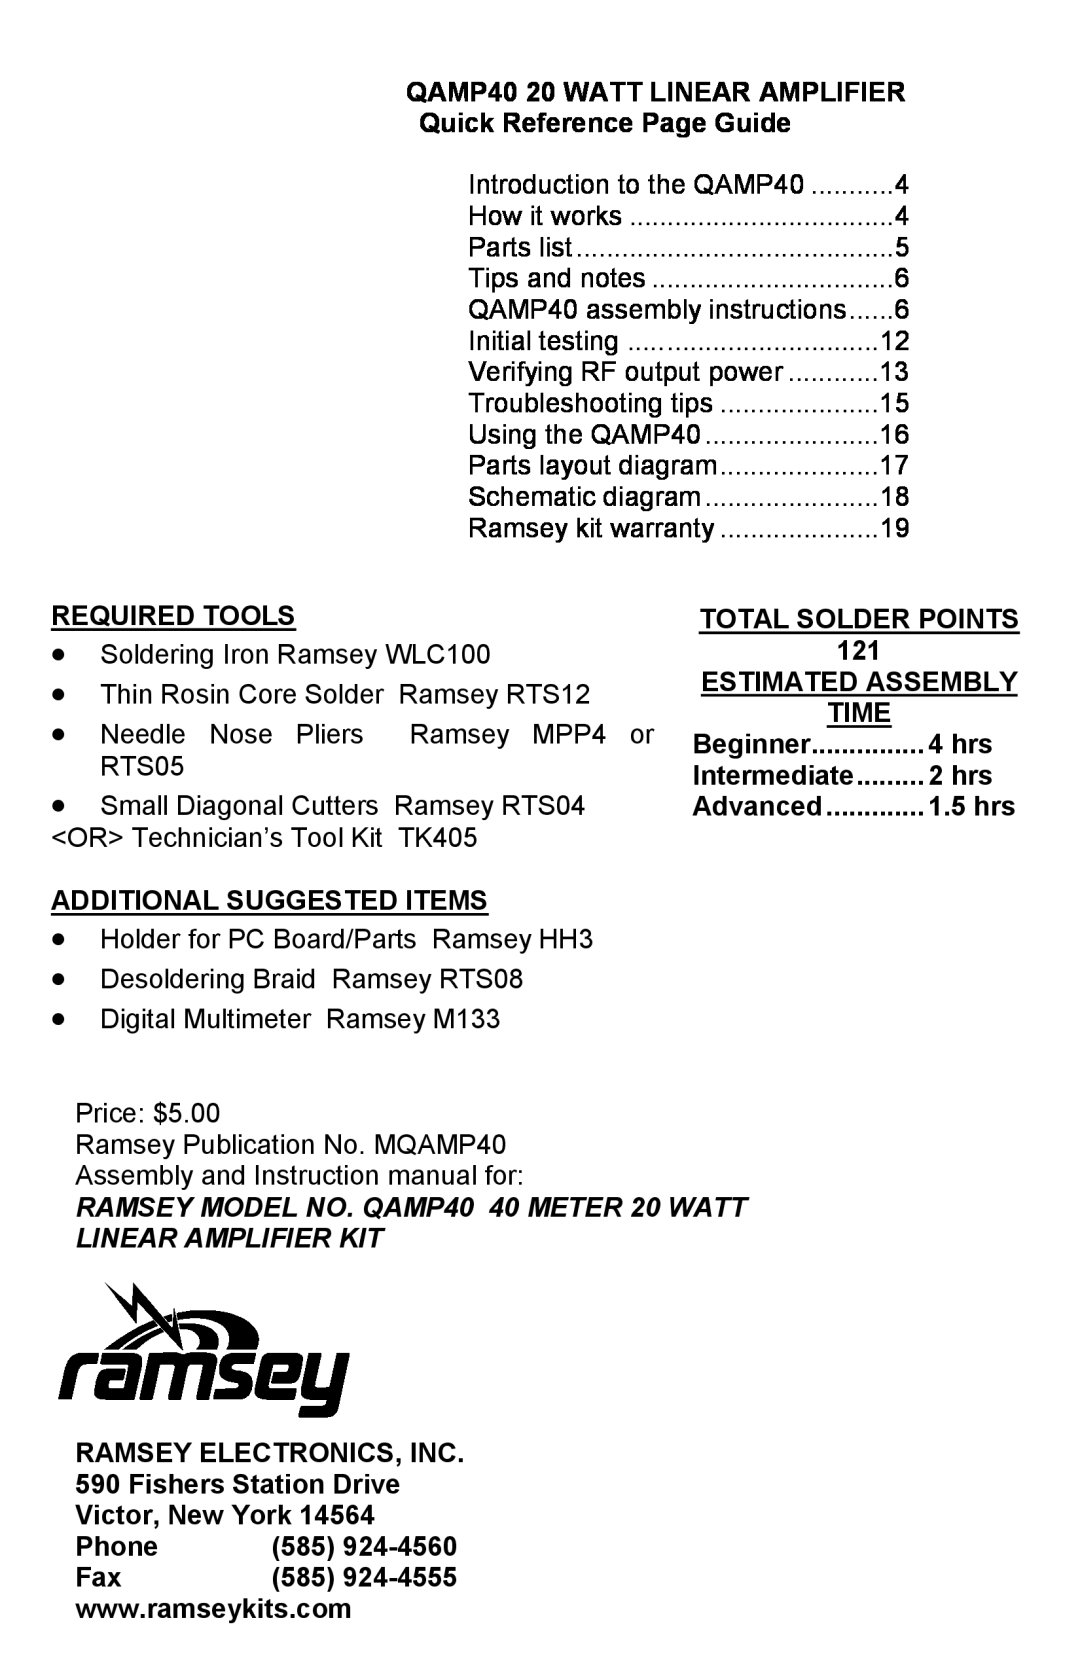 Ramsey Electronics QAMP40 20 WATT LINEAR AMPLIFIER, Quick Reference Page Guide, Required Tools, Total Solder Points 